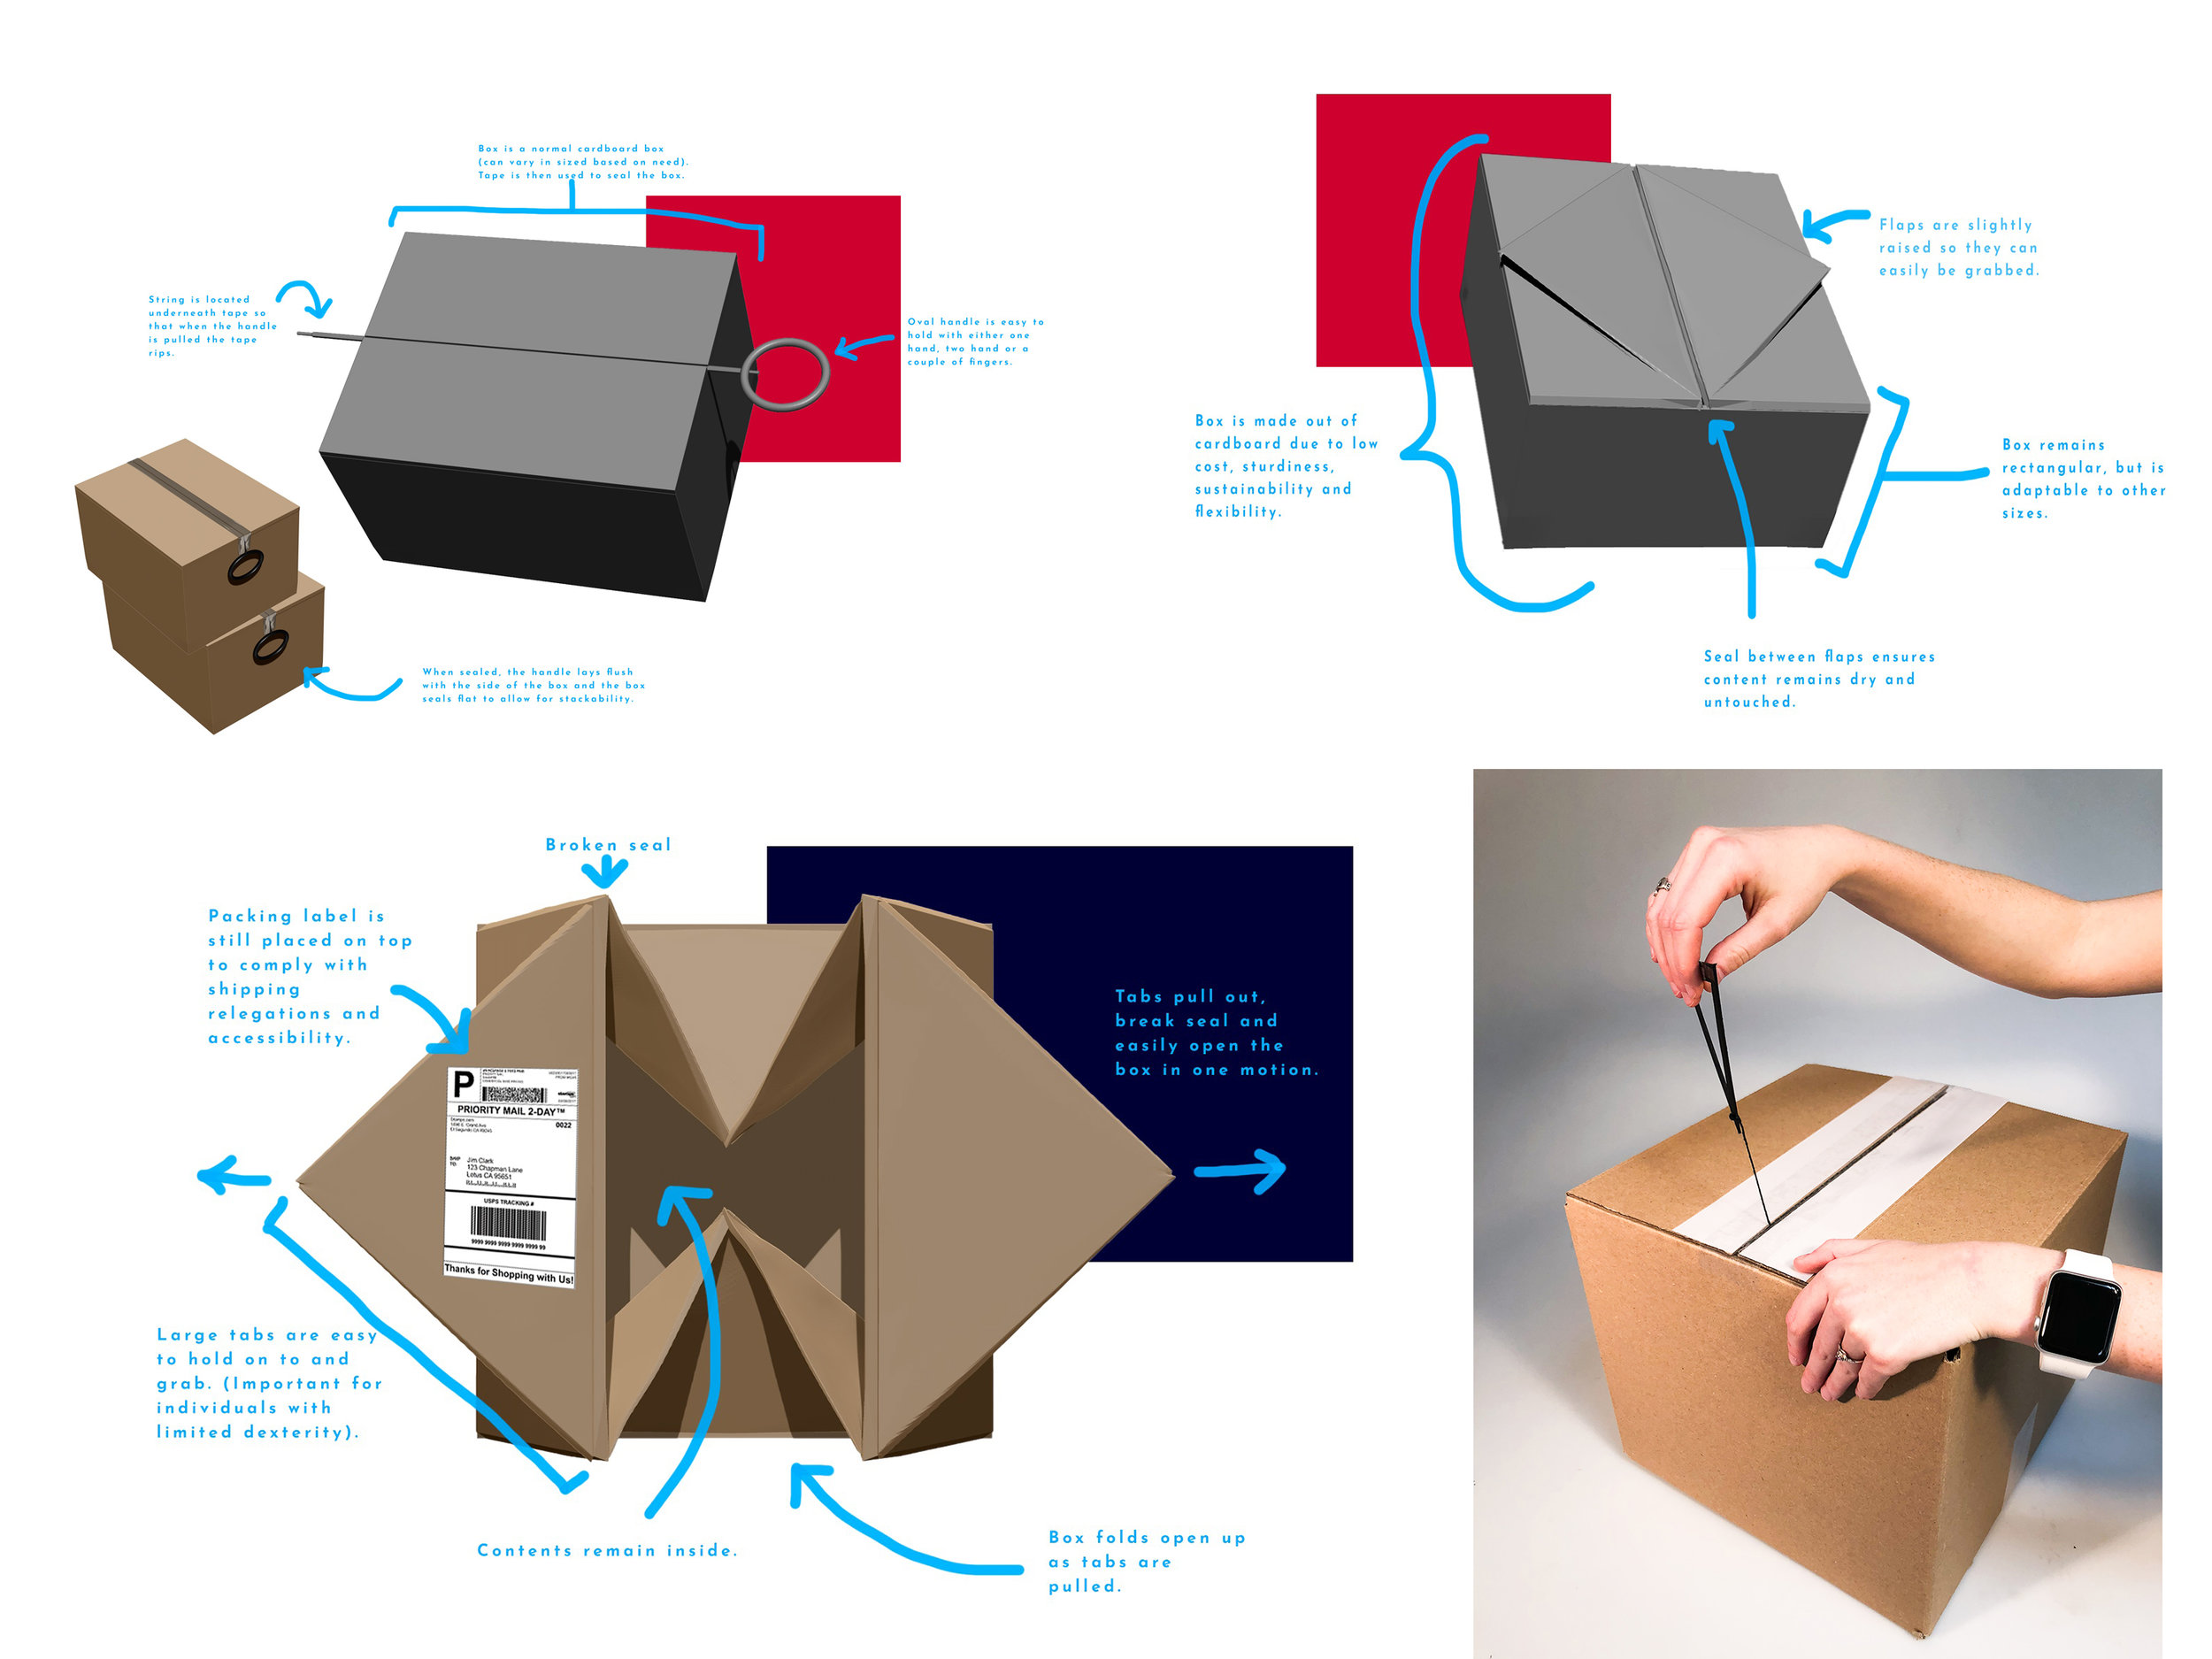 Copy of UX Design - Package Redesign for Individuals with Hand Mobility Disabilities